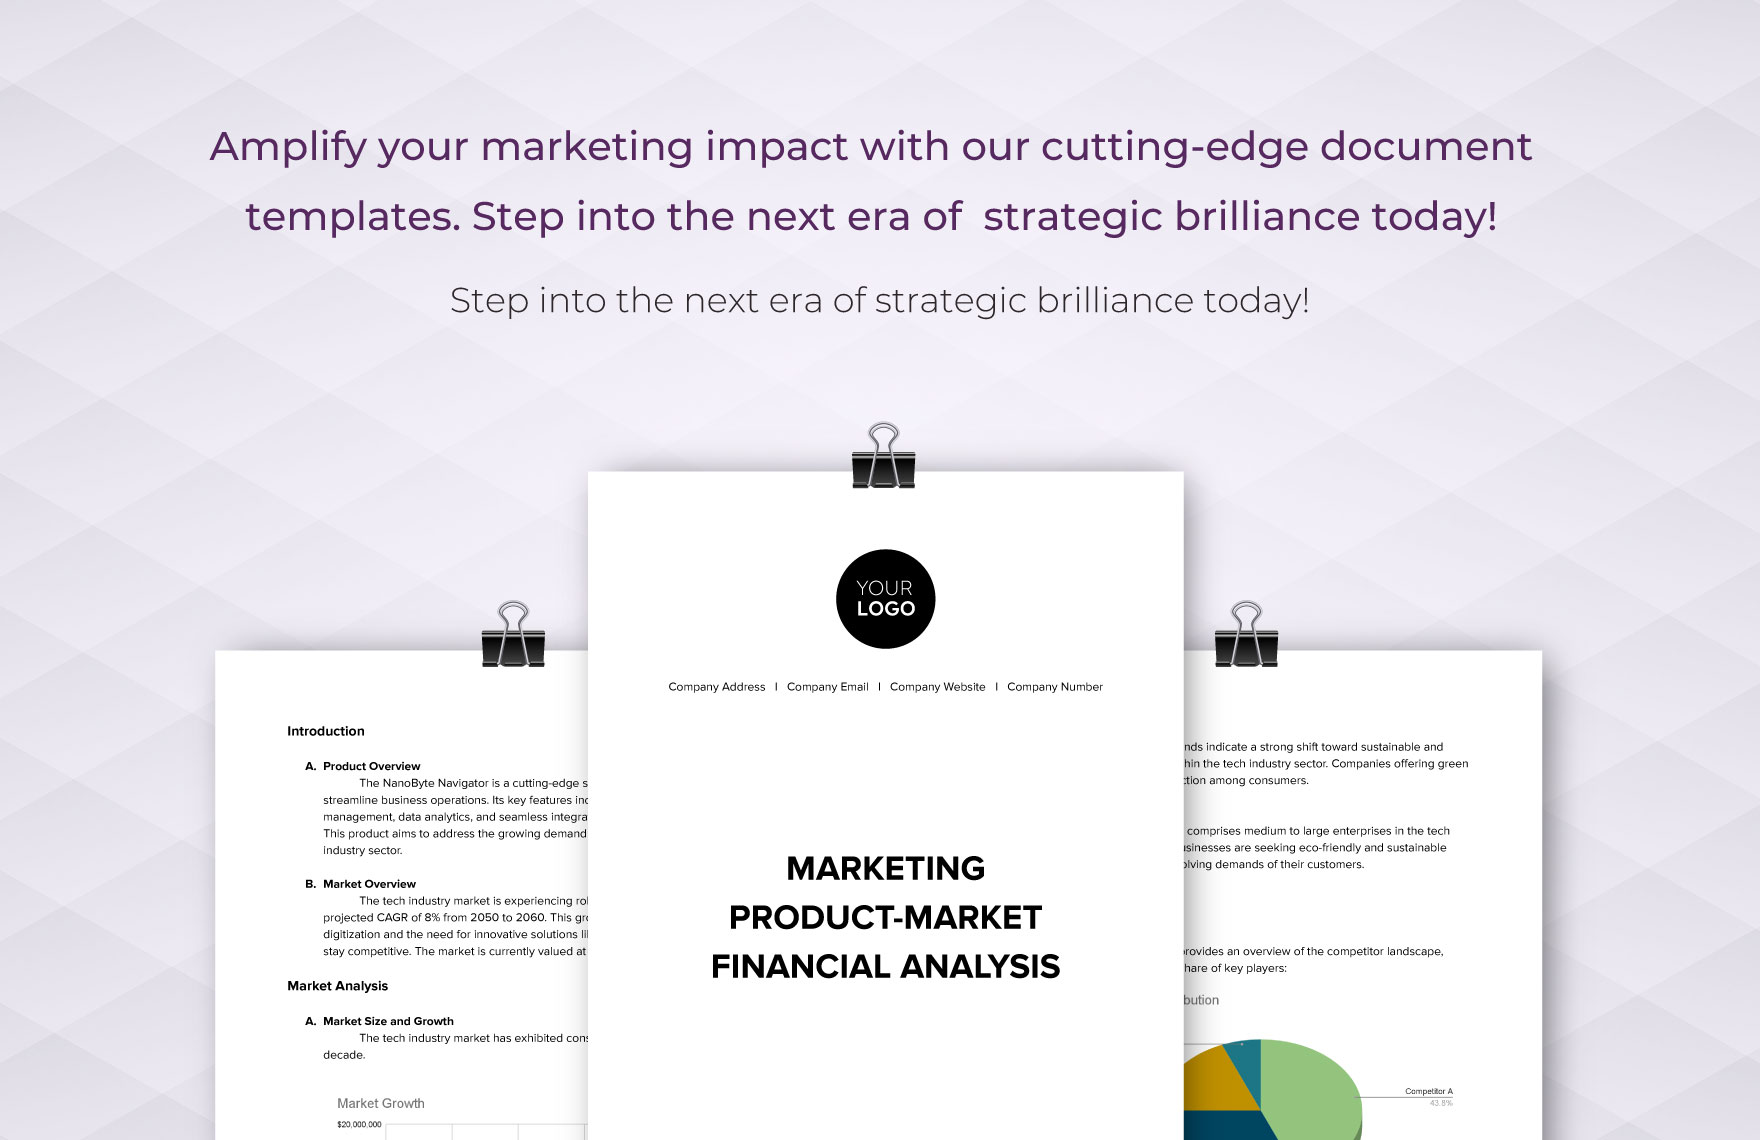 Marketing Product-Market Financial Analysis Template